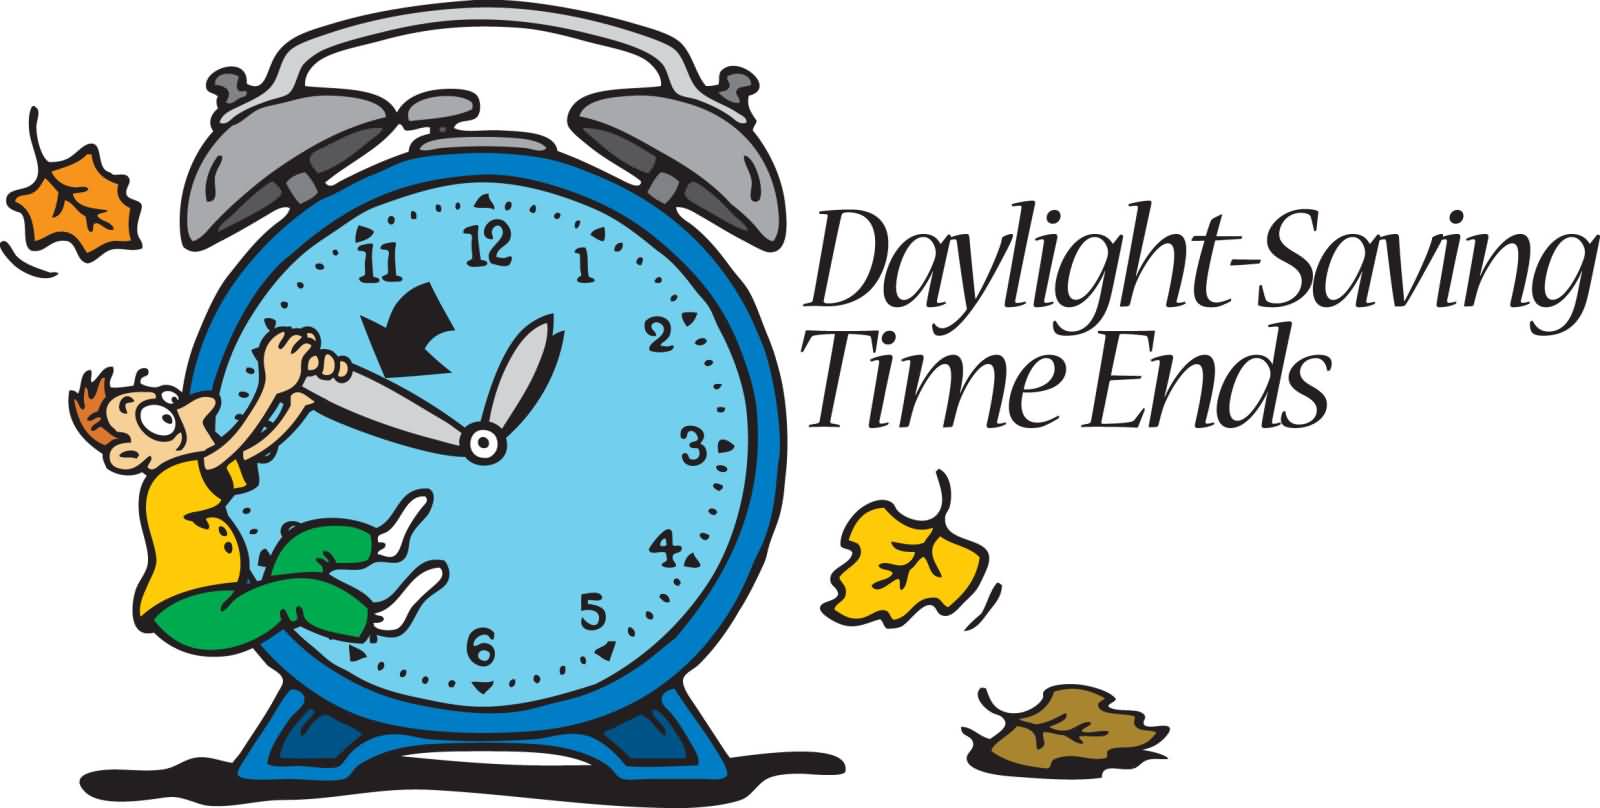 End of daylight savings time clip art